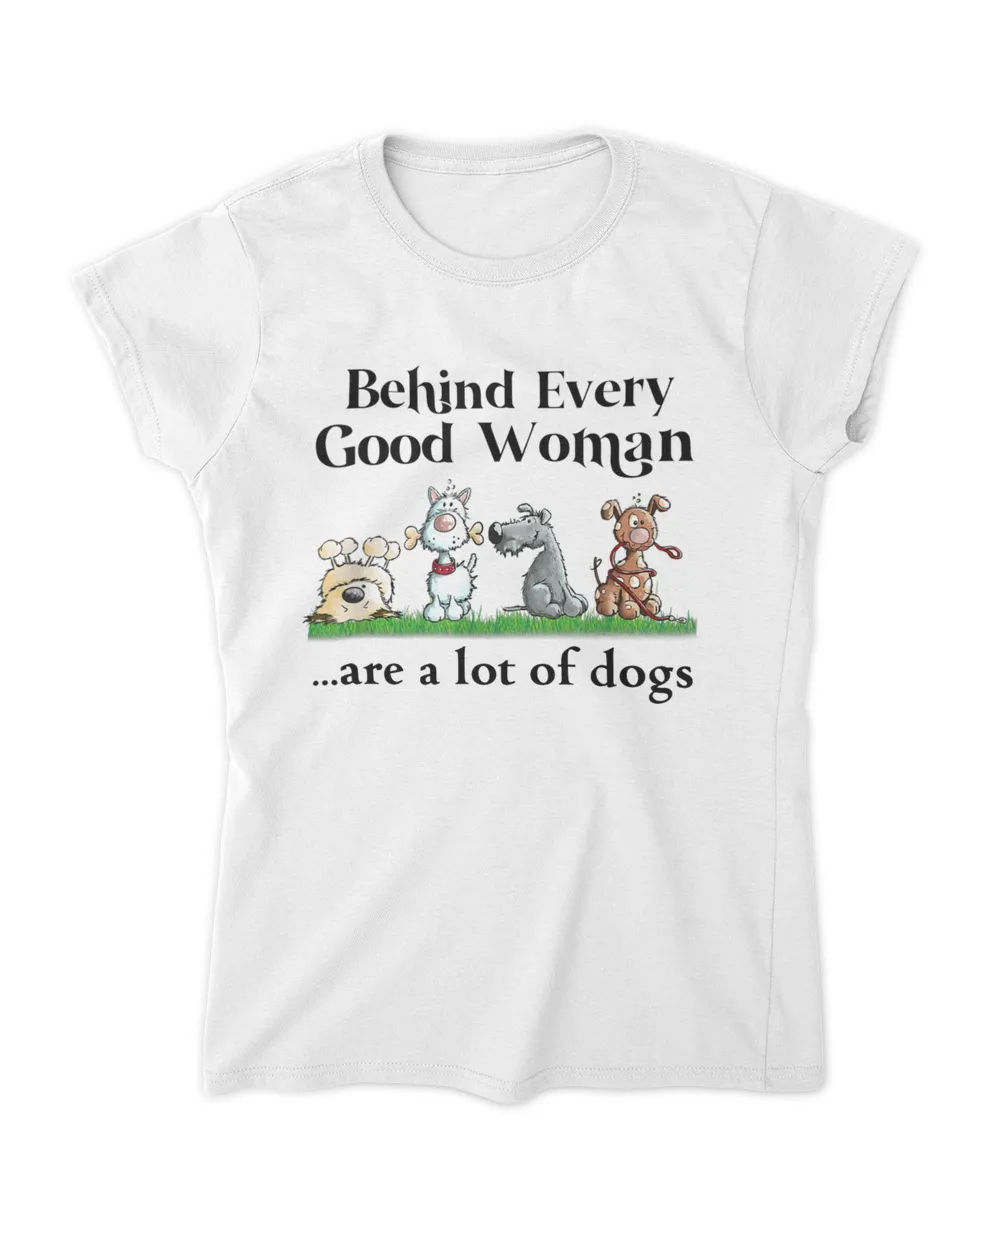 Behind every good woman are a lot of dogs 1